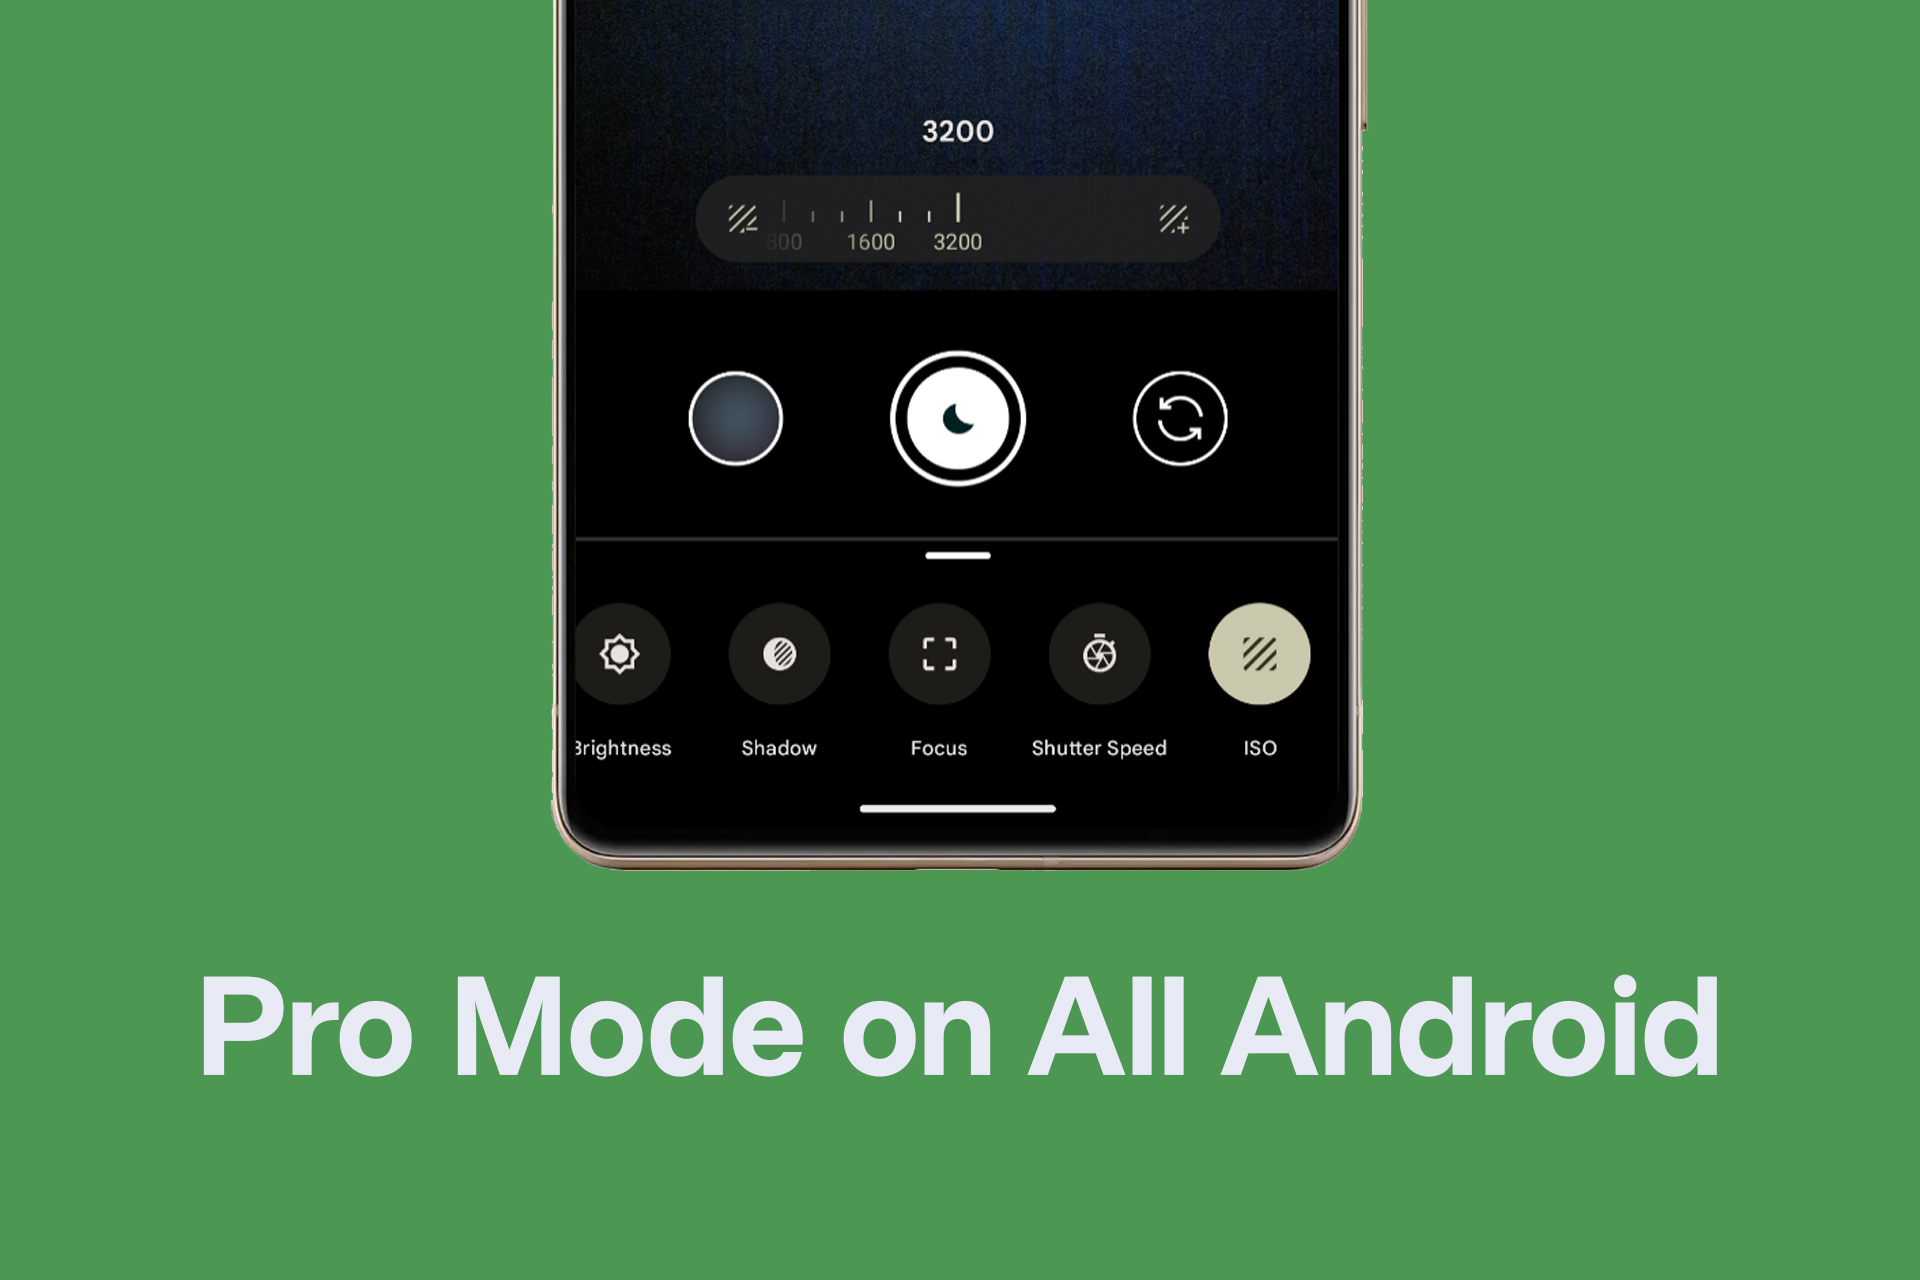 Pixel 8’s manual camera settings (exclusive pro) are now available for all Android devices